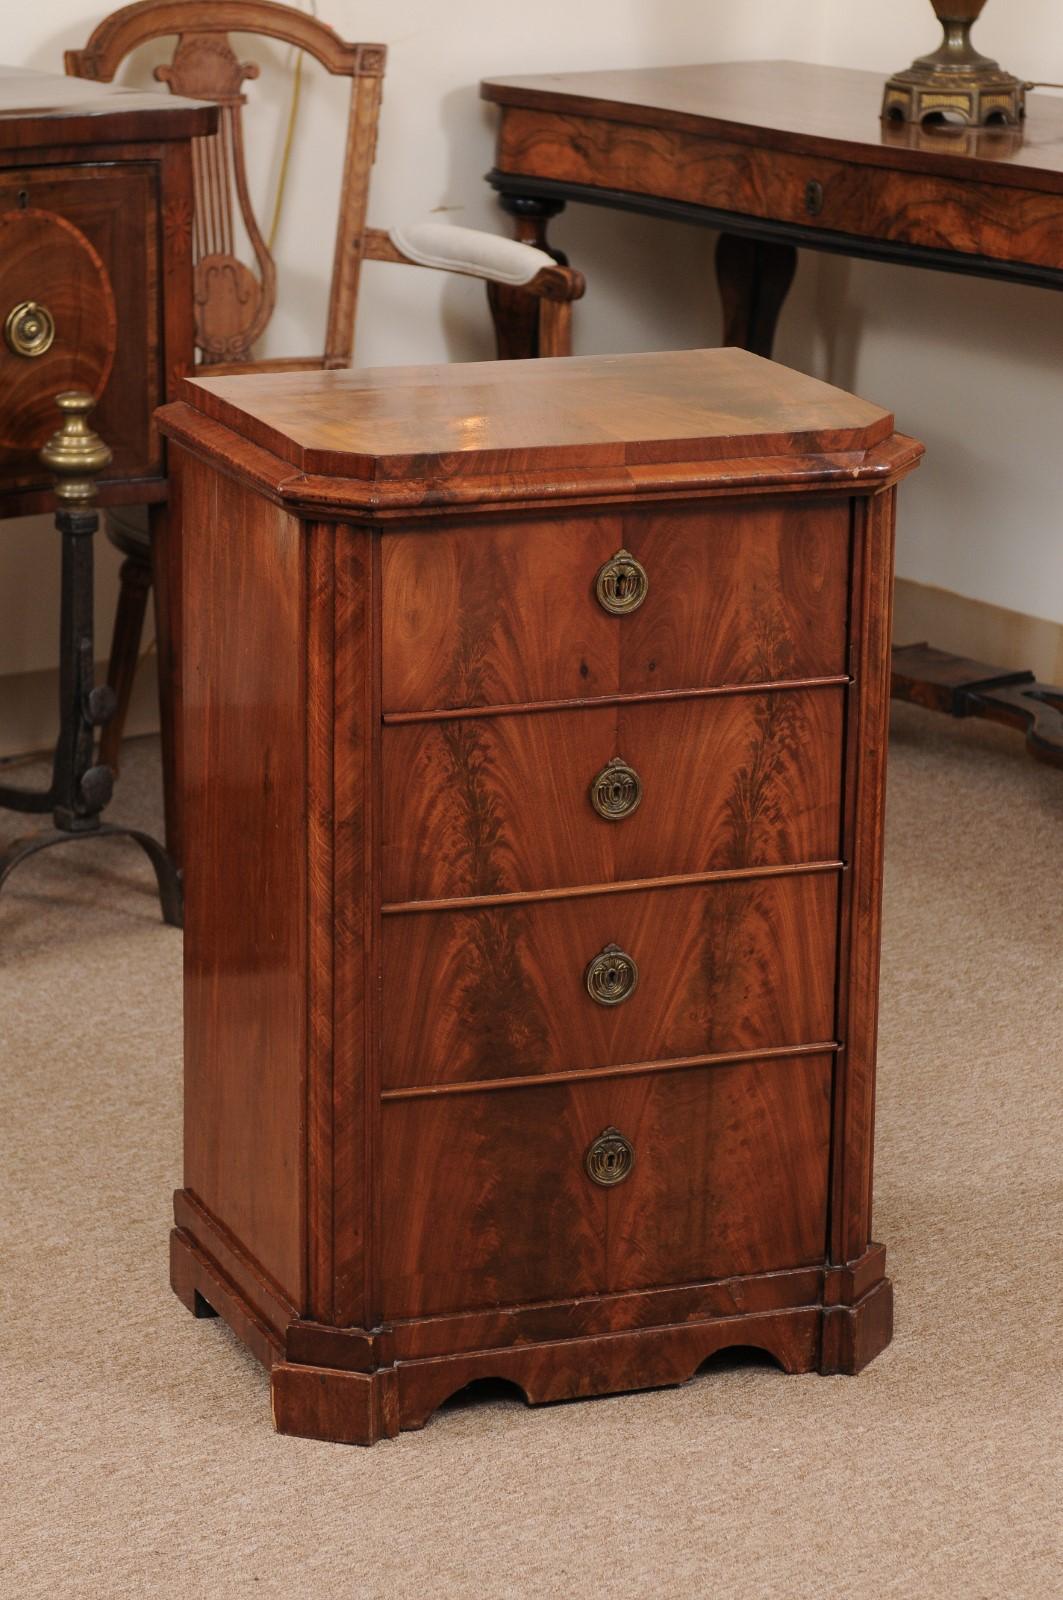 19th century Biedermeier walnut side cabinet/commodino with canted corners & faux drawers.